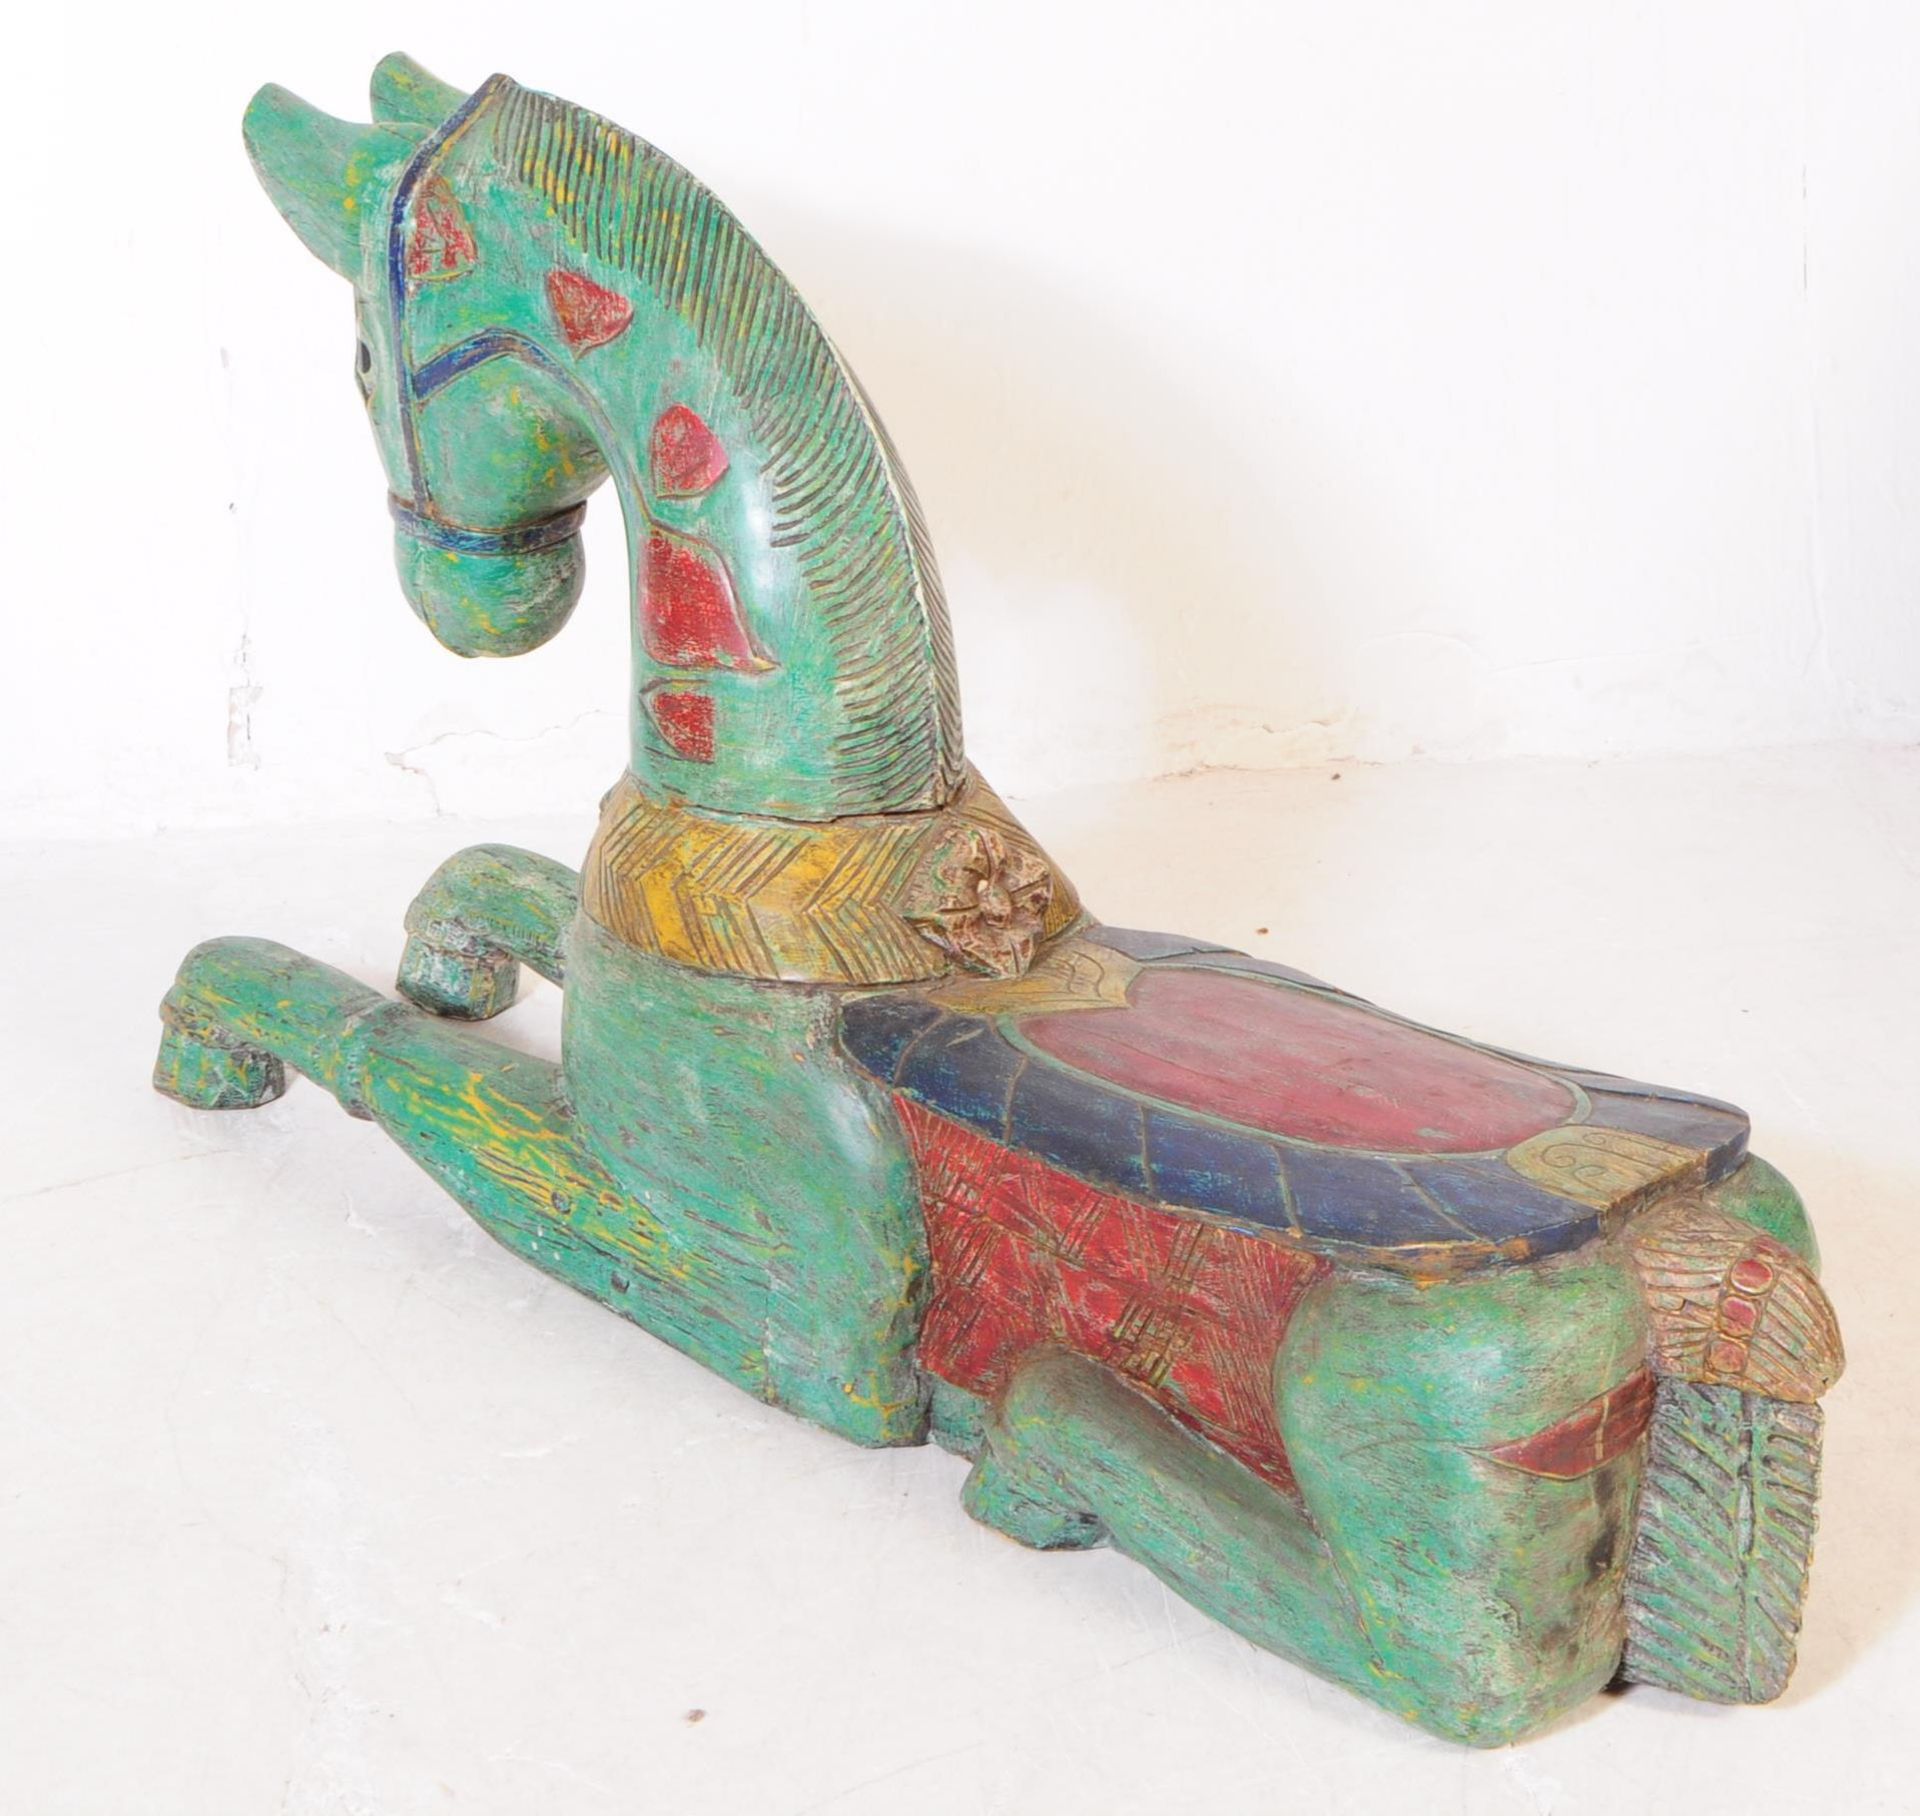 TWO MID 20TH CENTURY FOLK ART SOLID WOOD CARVED HORSES - Image 5 of 6